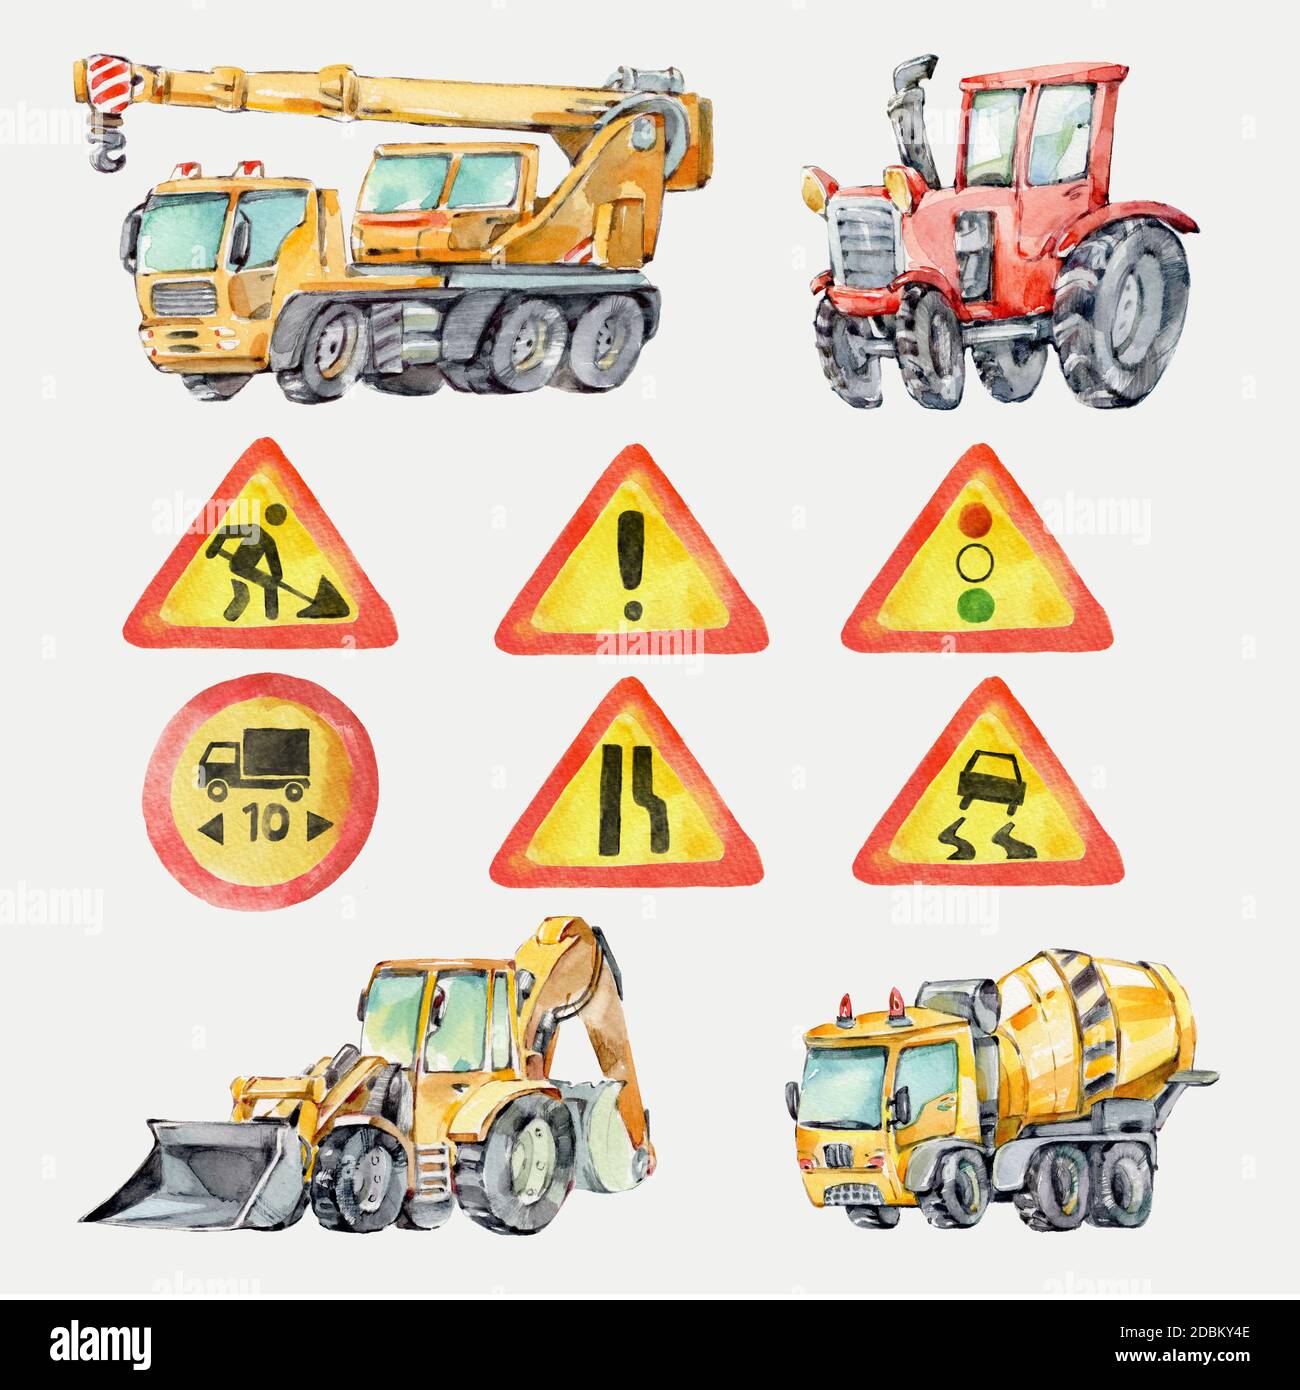 Watercolor colorful little toy Trucks, Cars and Road Signs. Watercolor Grunge Background for Kids. Red tractor, Excavator, Digger machine, Building ma Stock Photo